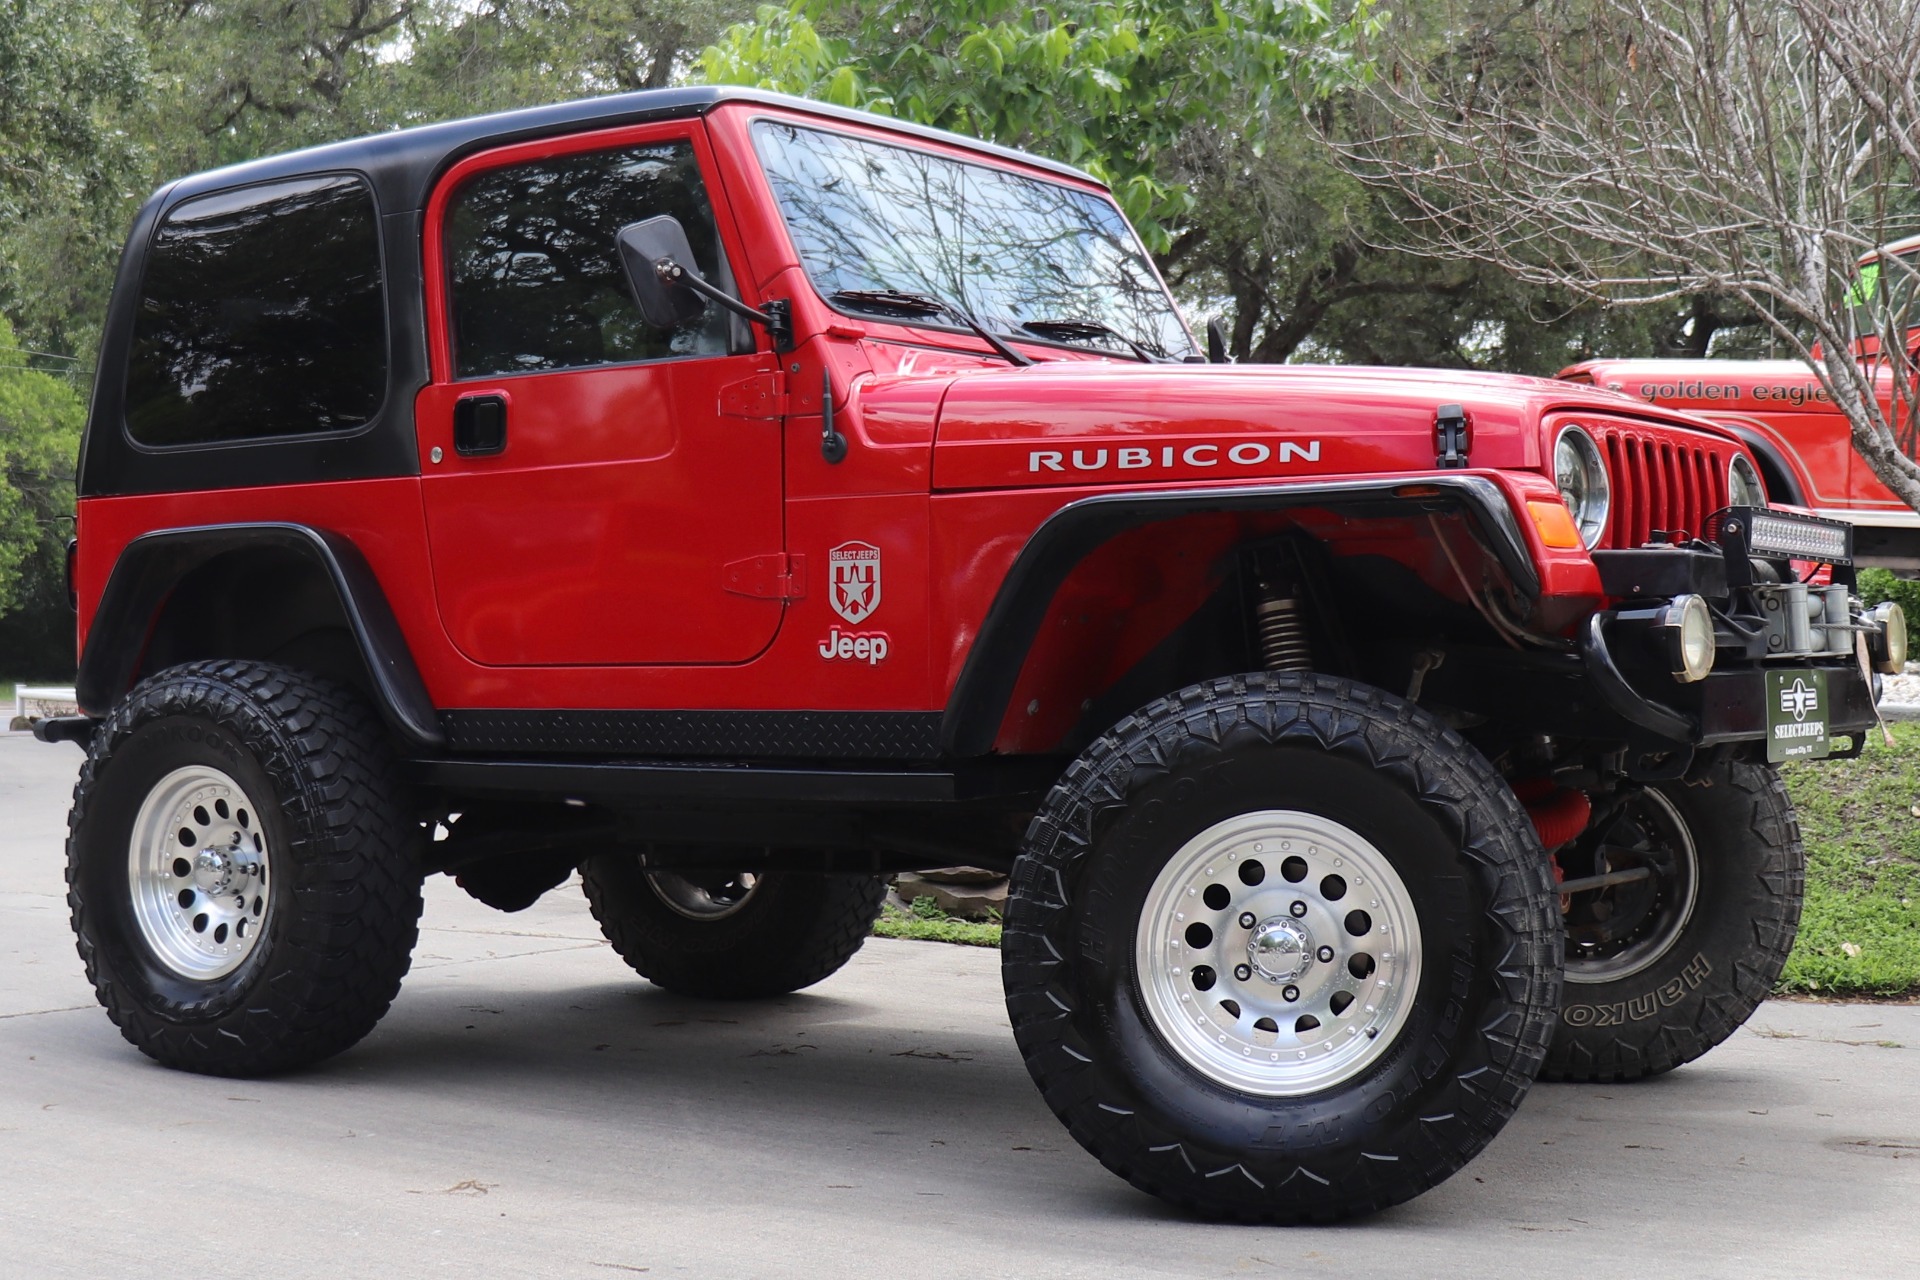 Used 2006 Jeep Wrangler Rubicon For Sale ($27,995) | Select Jeeps Inc.  Stock #720993